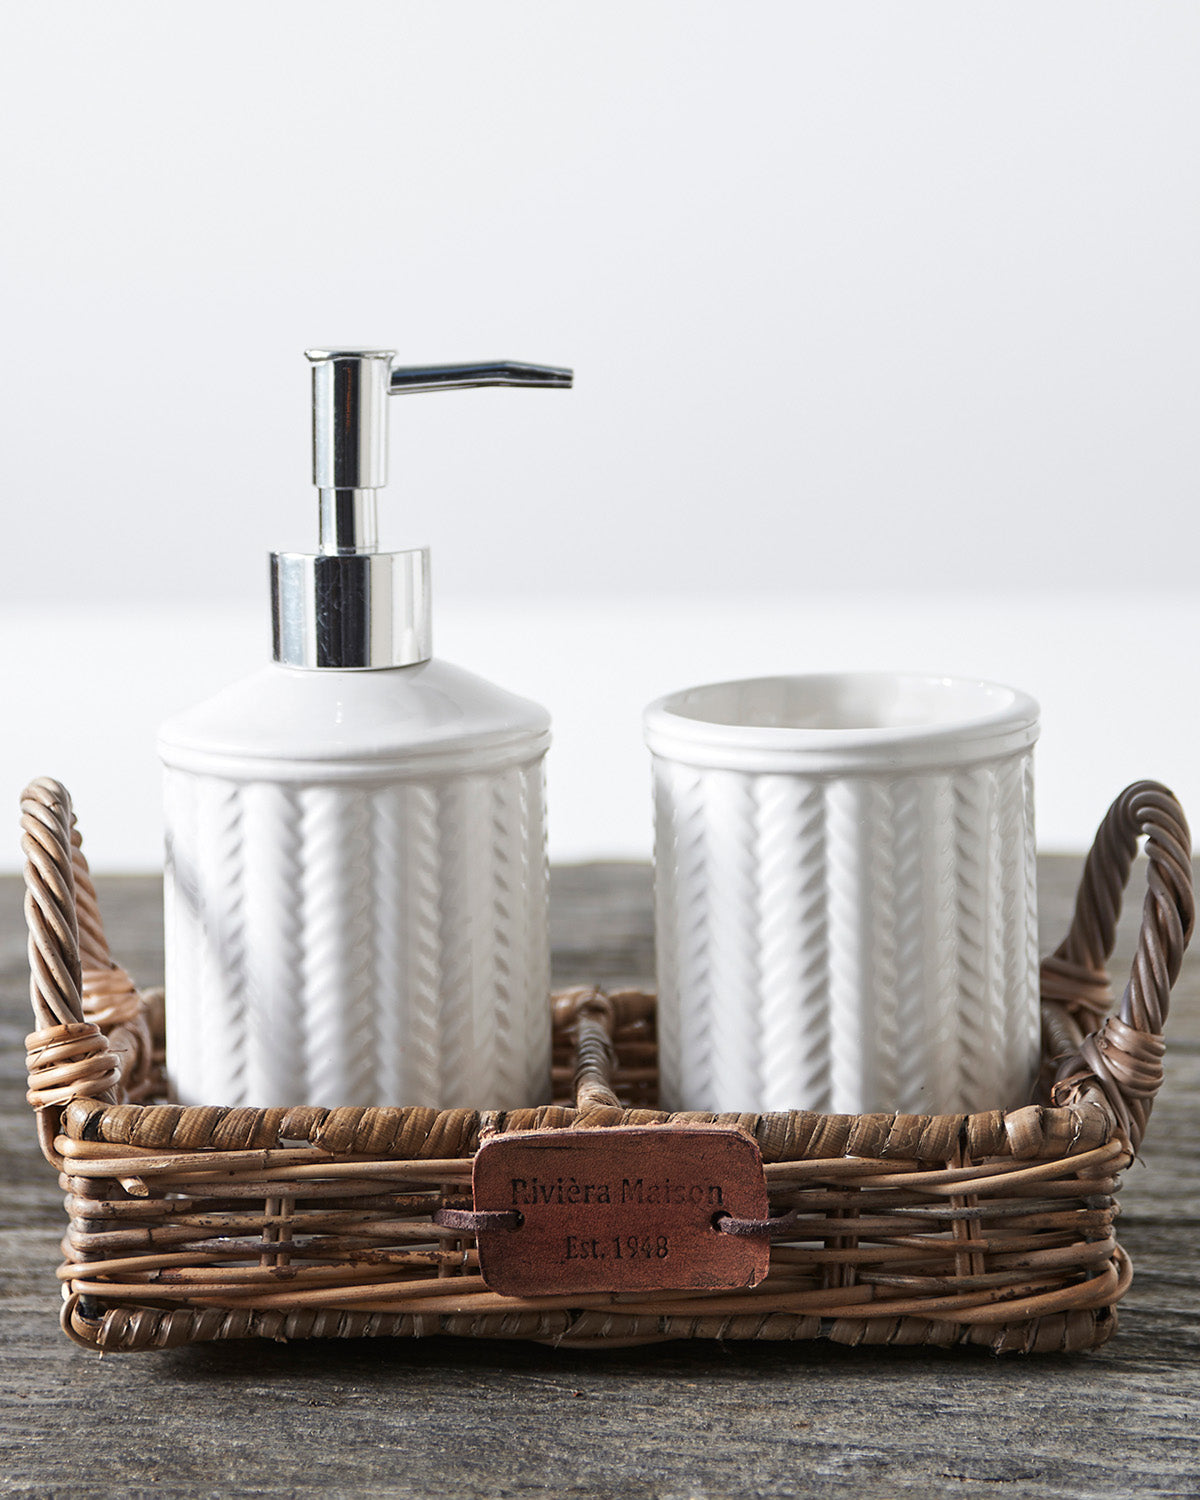 SOAP TRAY made of rustic rattan decorated with a soap dispenser and a mug by Riviera Maison